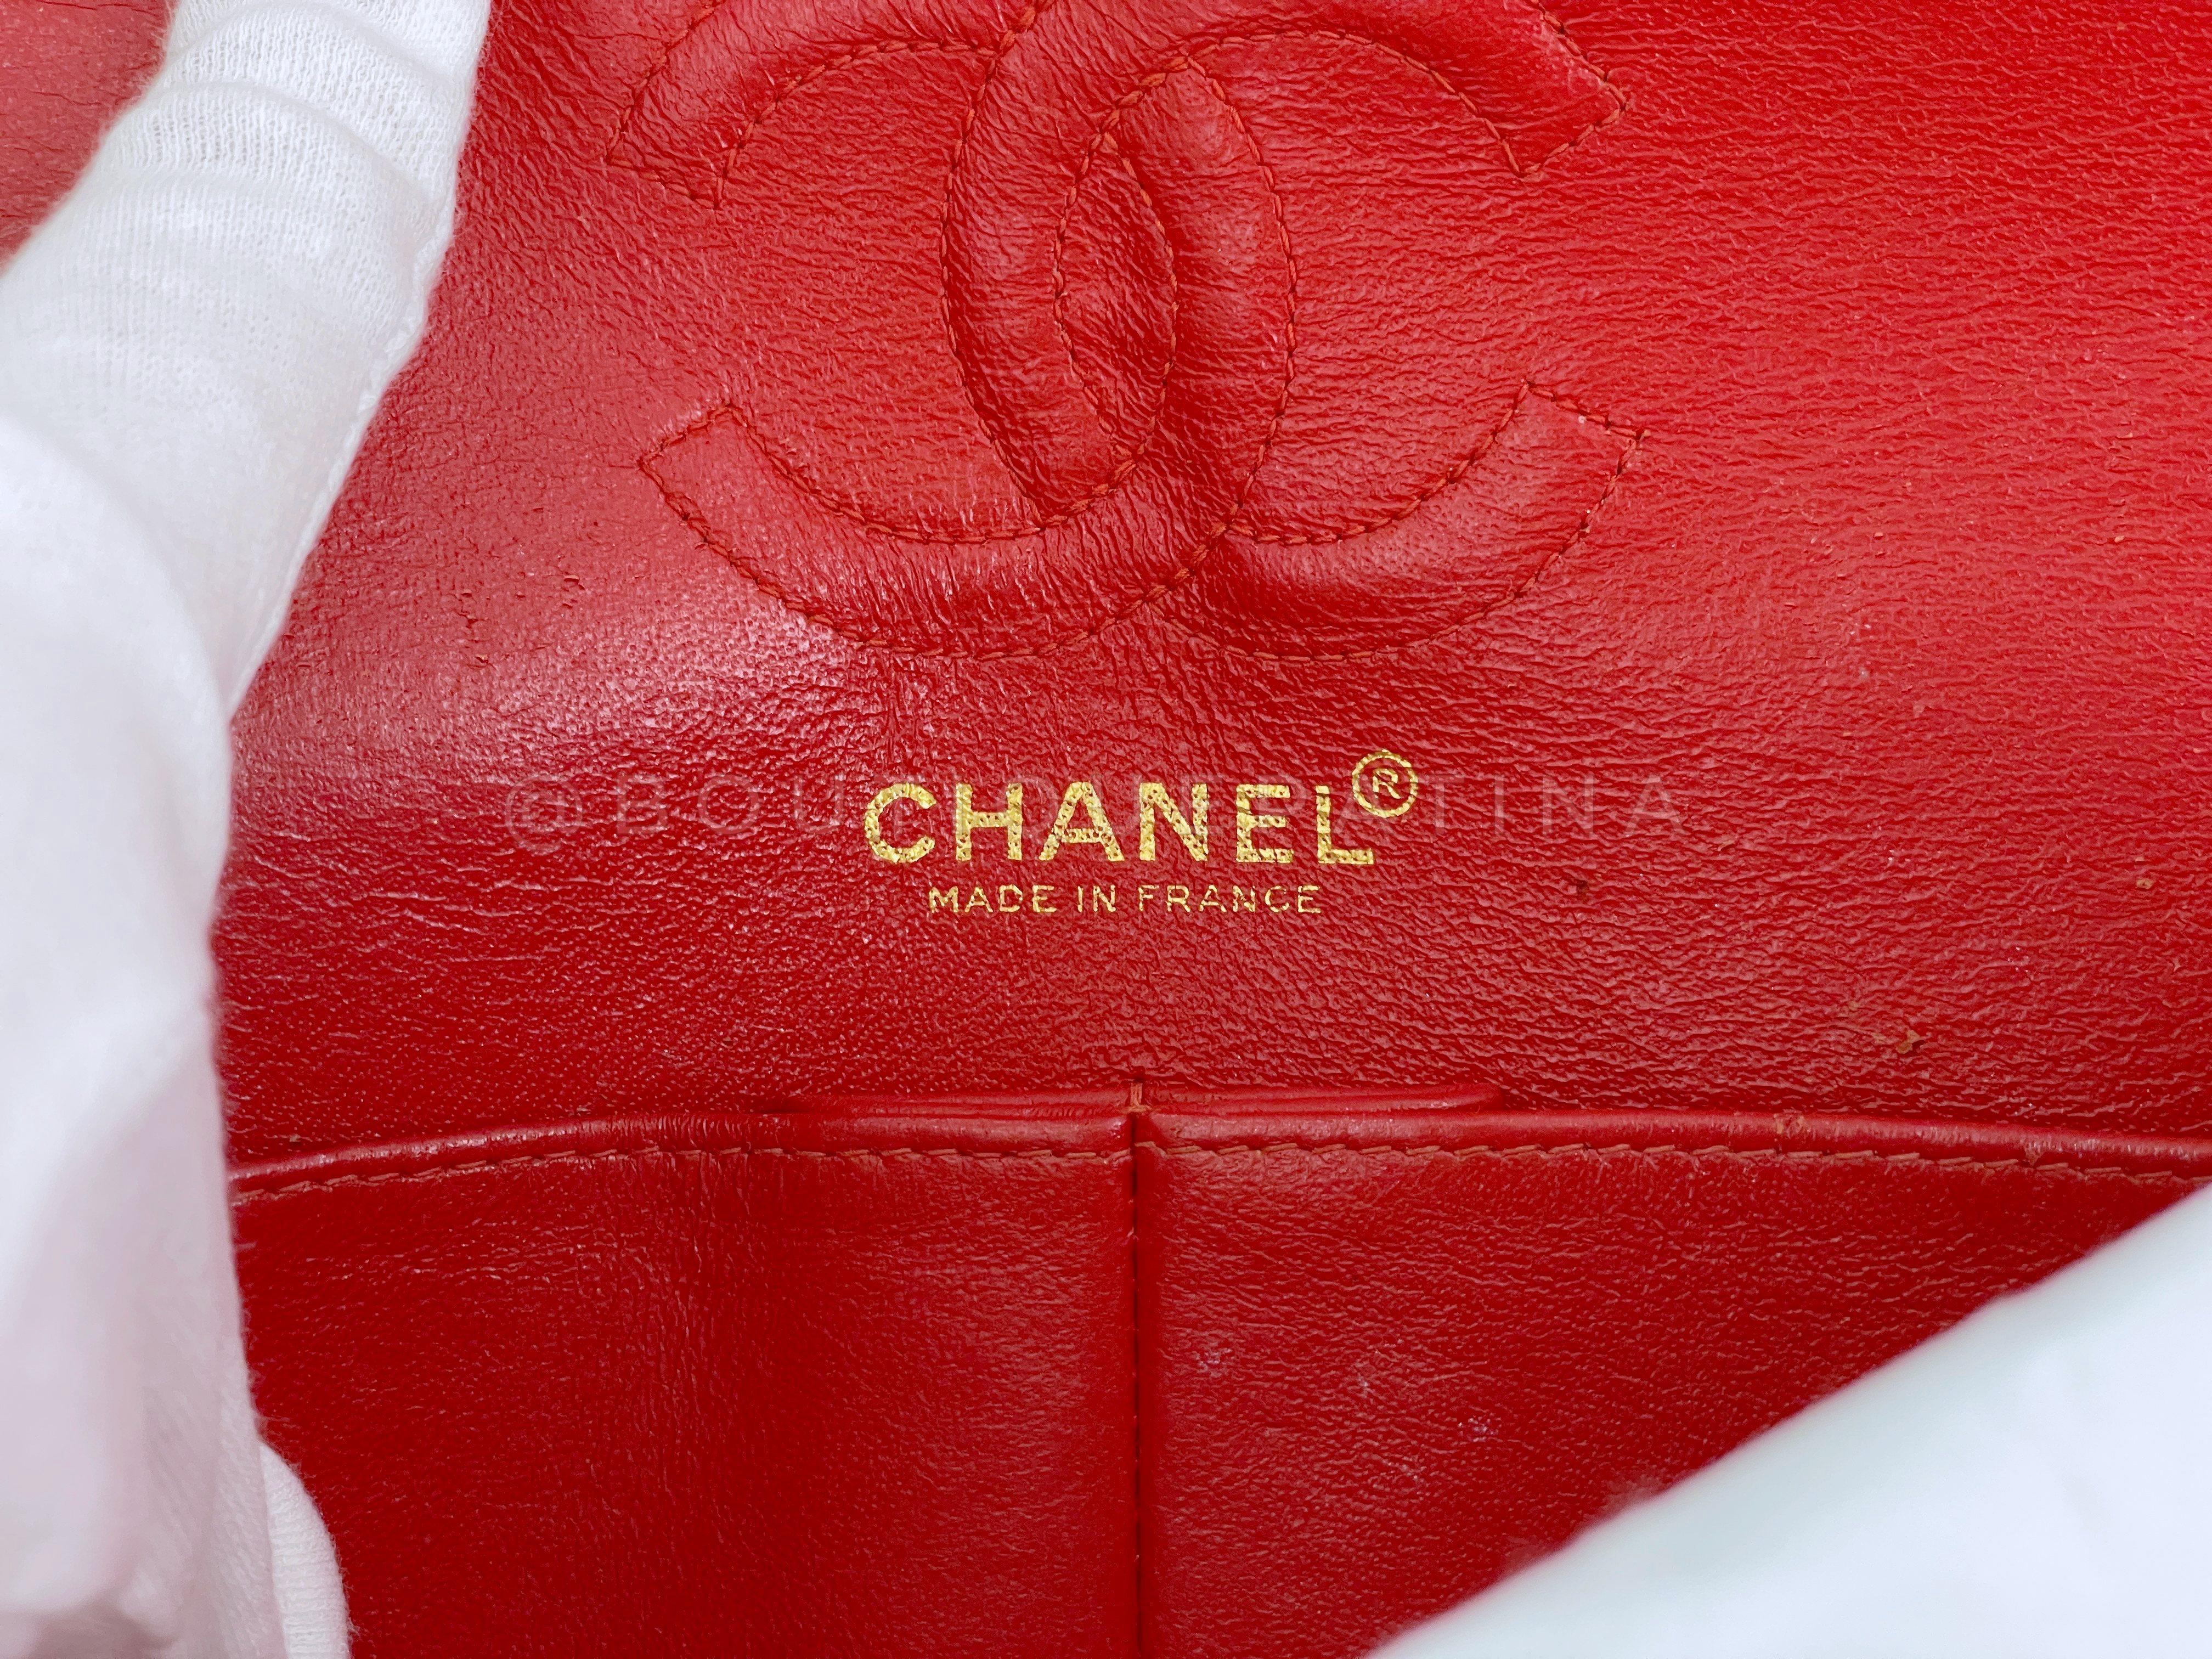 Chanel 2002 Vintage Red Caviar Small Classic Double Flap Bag 24k GHW 66396 For Sale 4